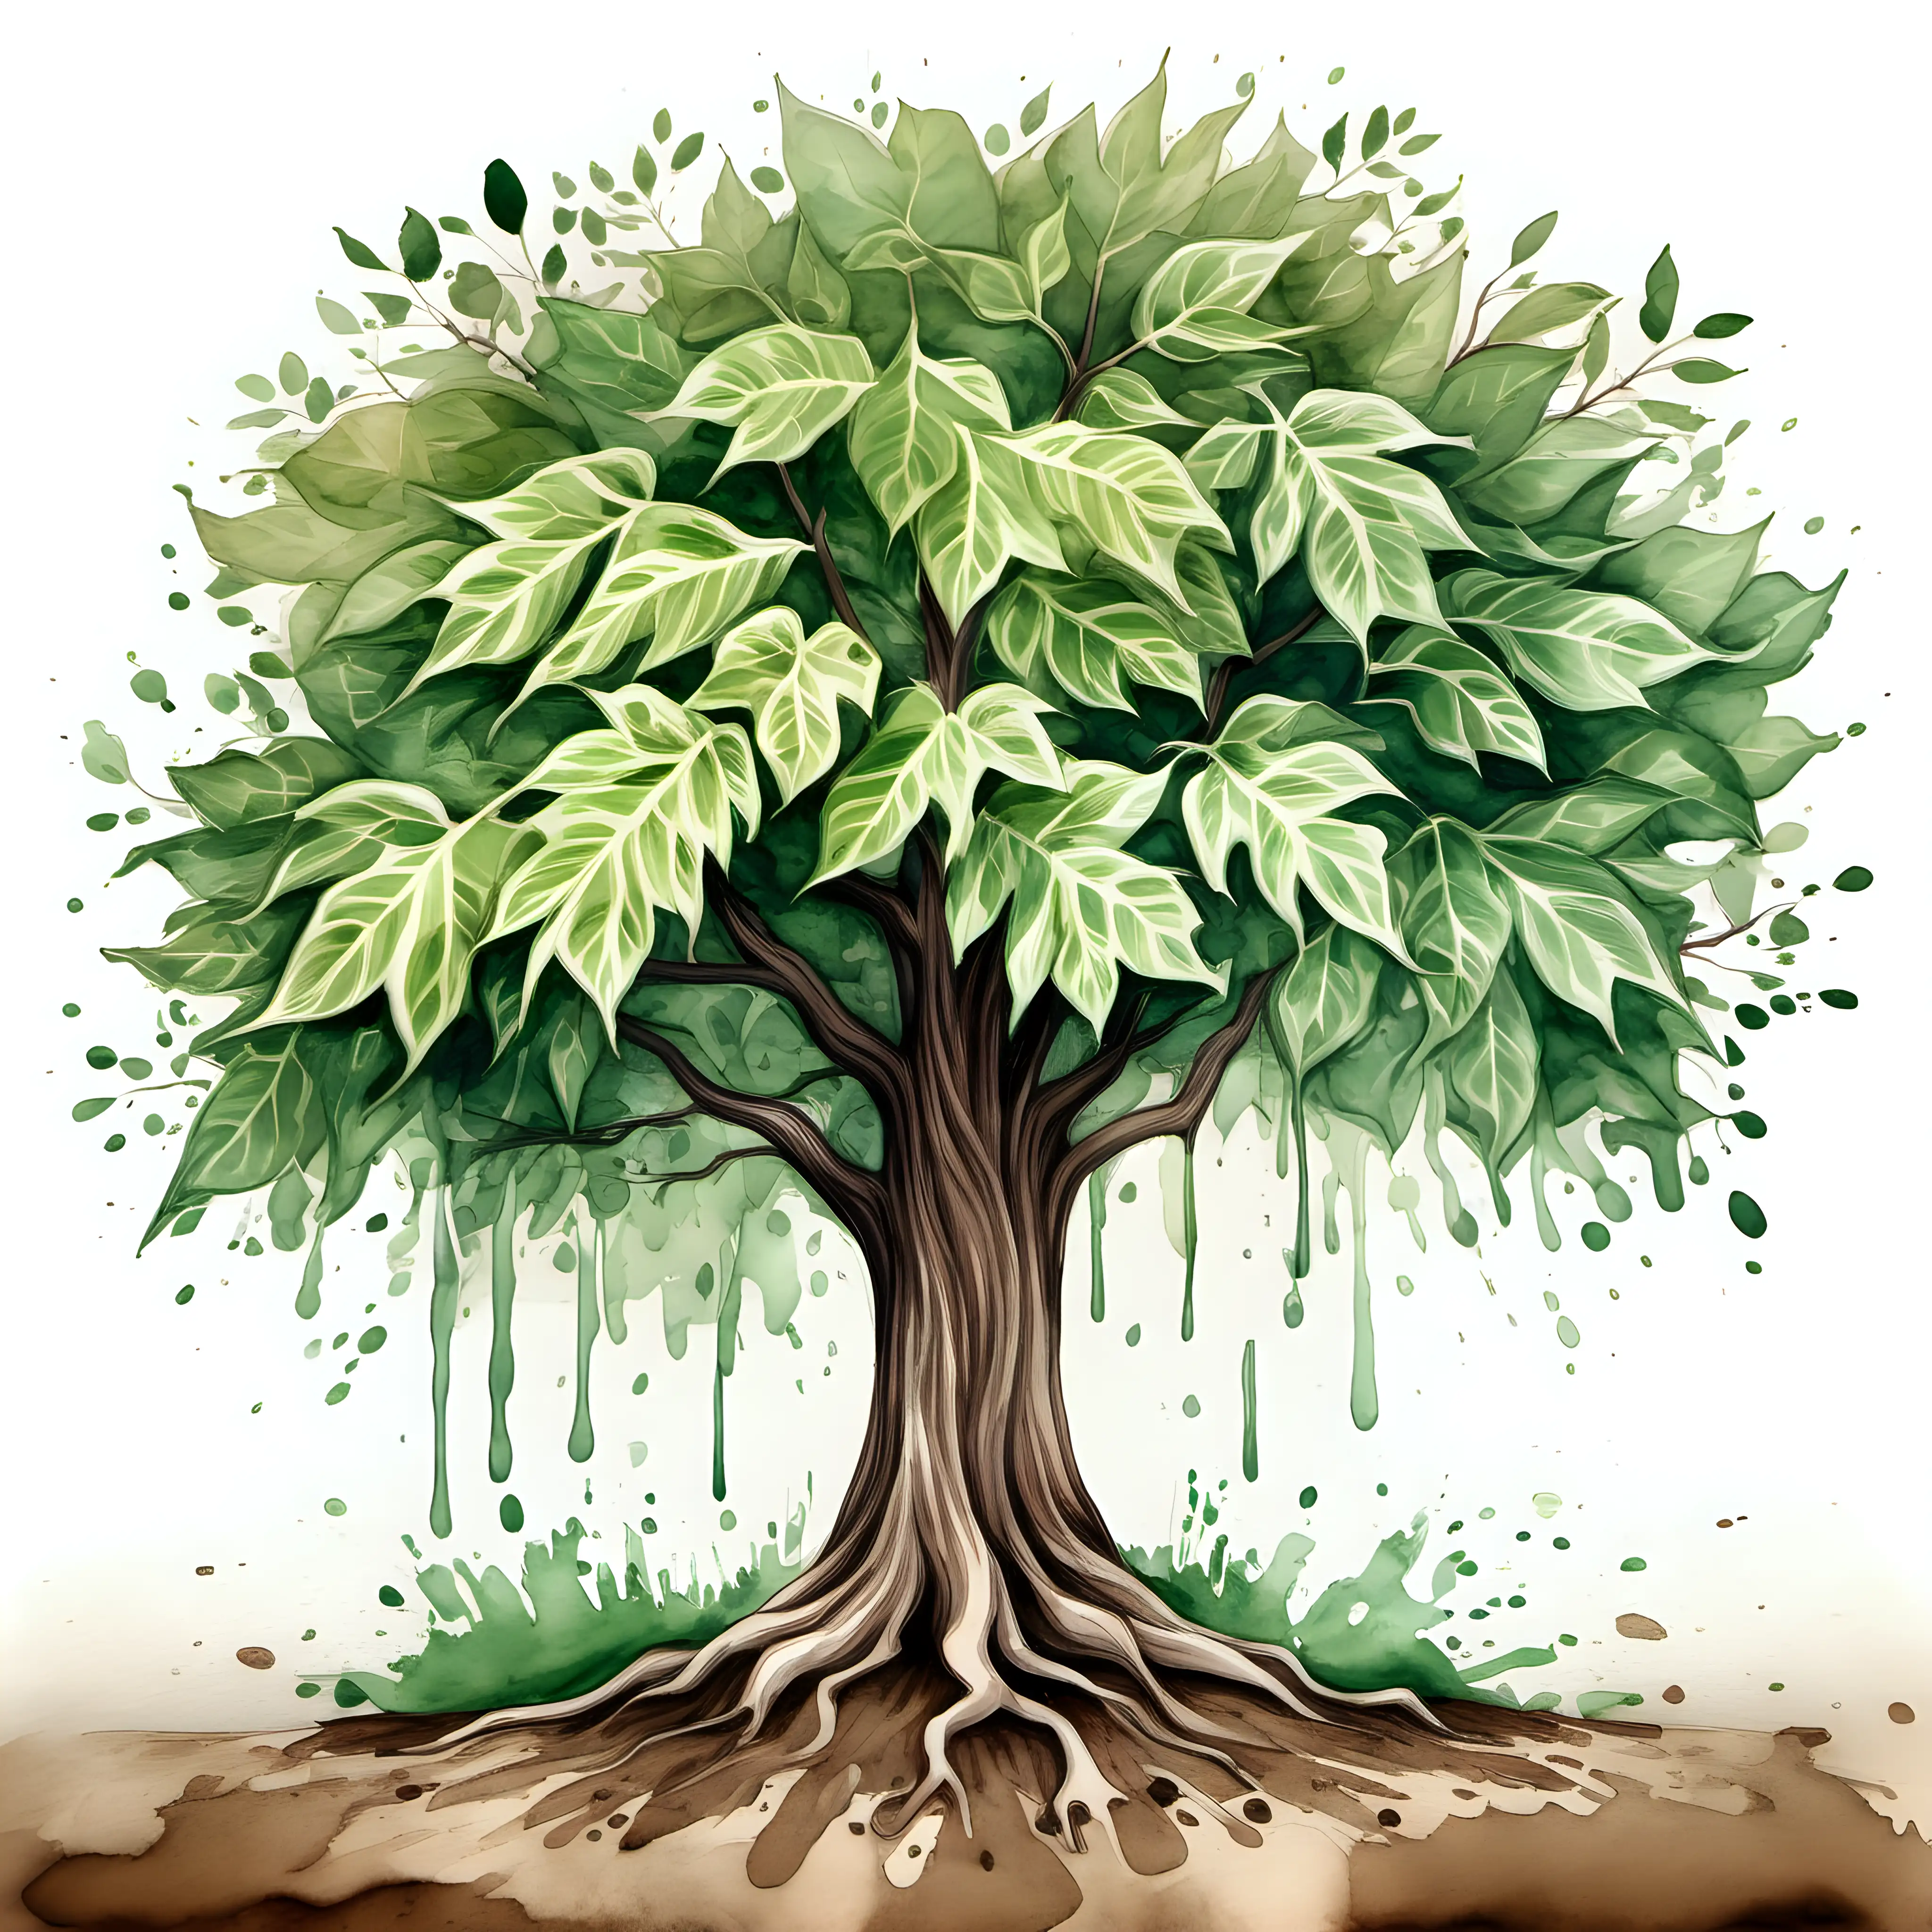 Vibrant Watercolor Tree with Lush Green Leaves on Brown Ground Stunning Nature Art